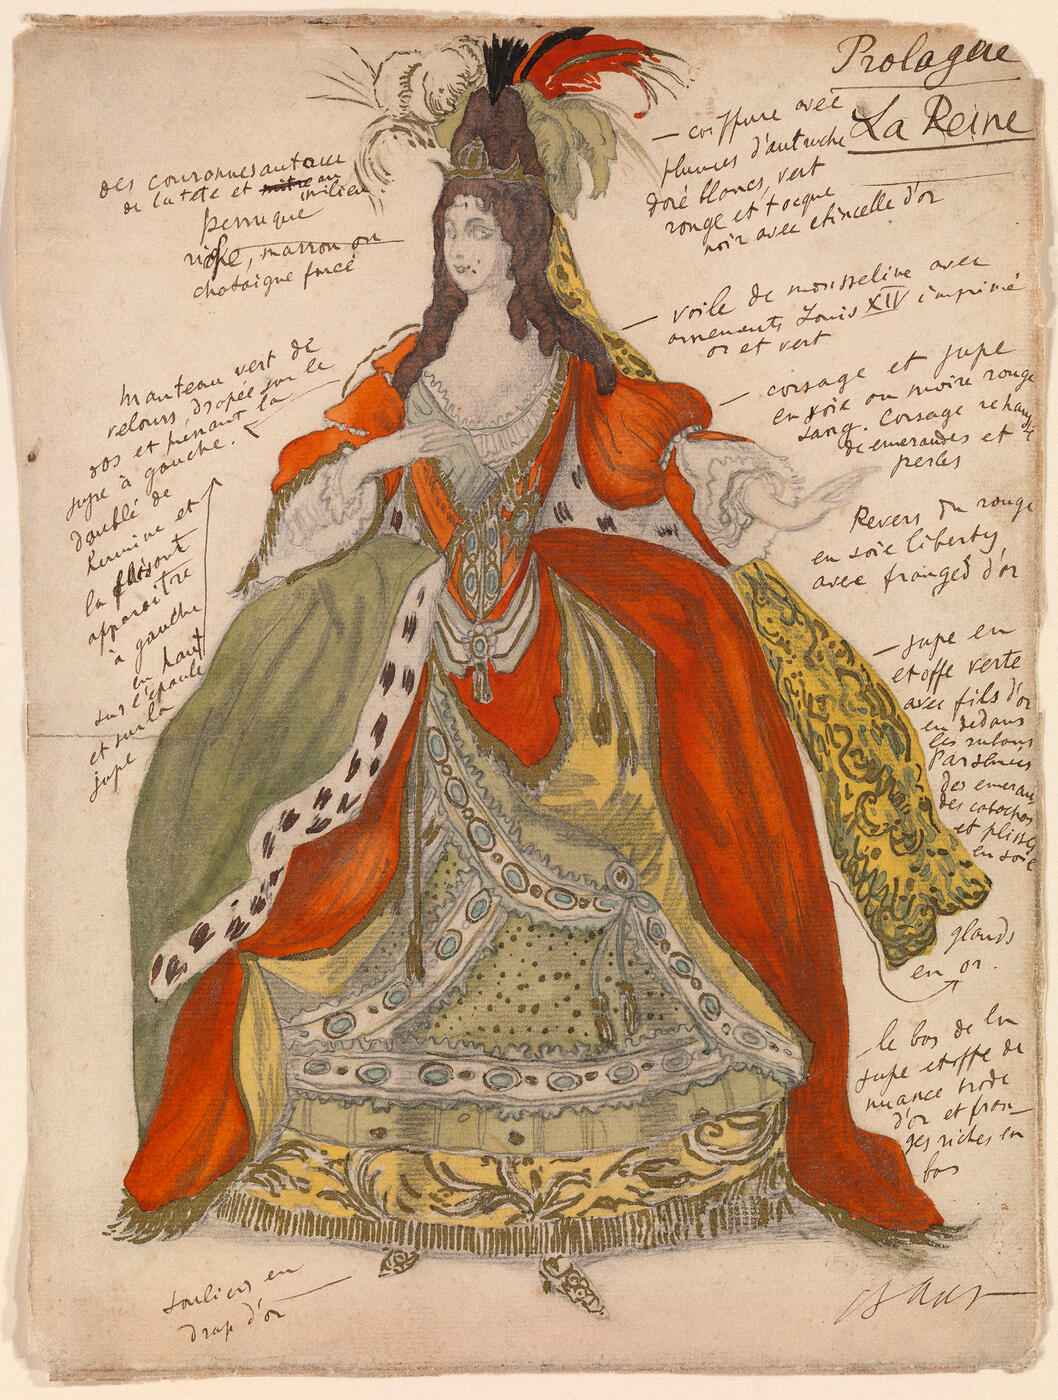 Costume Design for the Queen from "Sleeping Beauty"